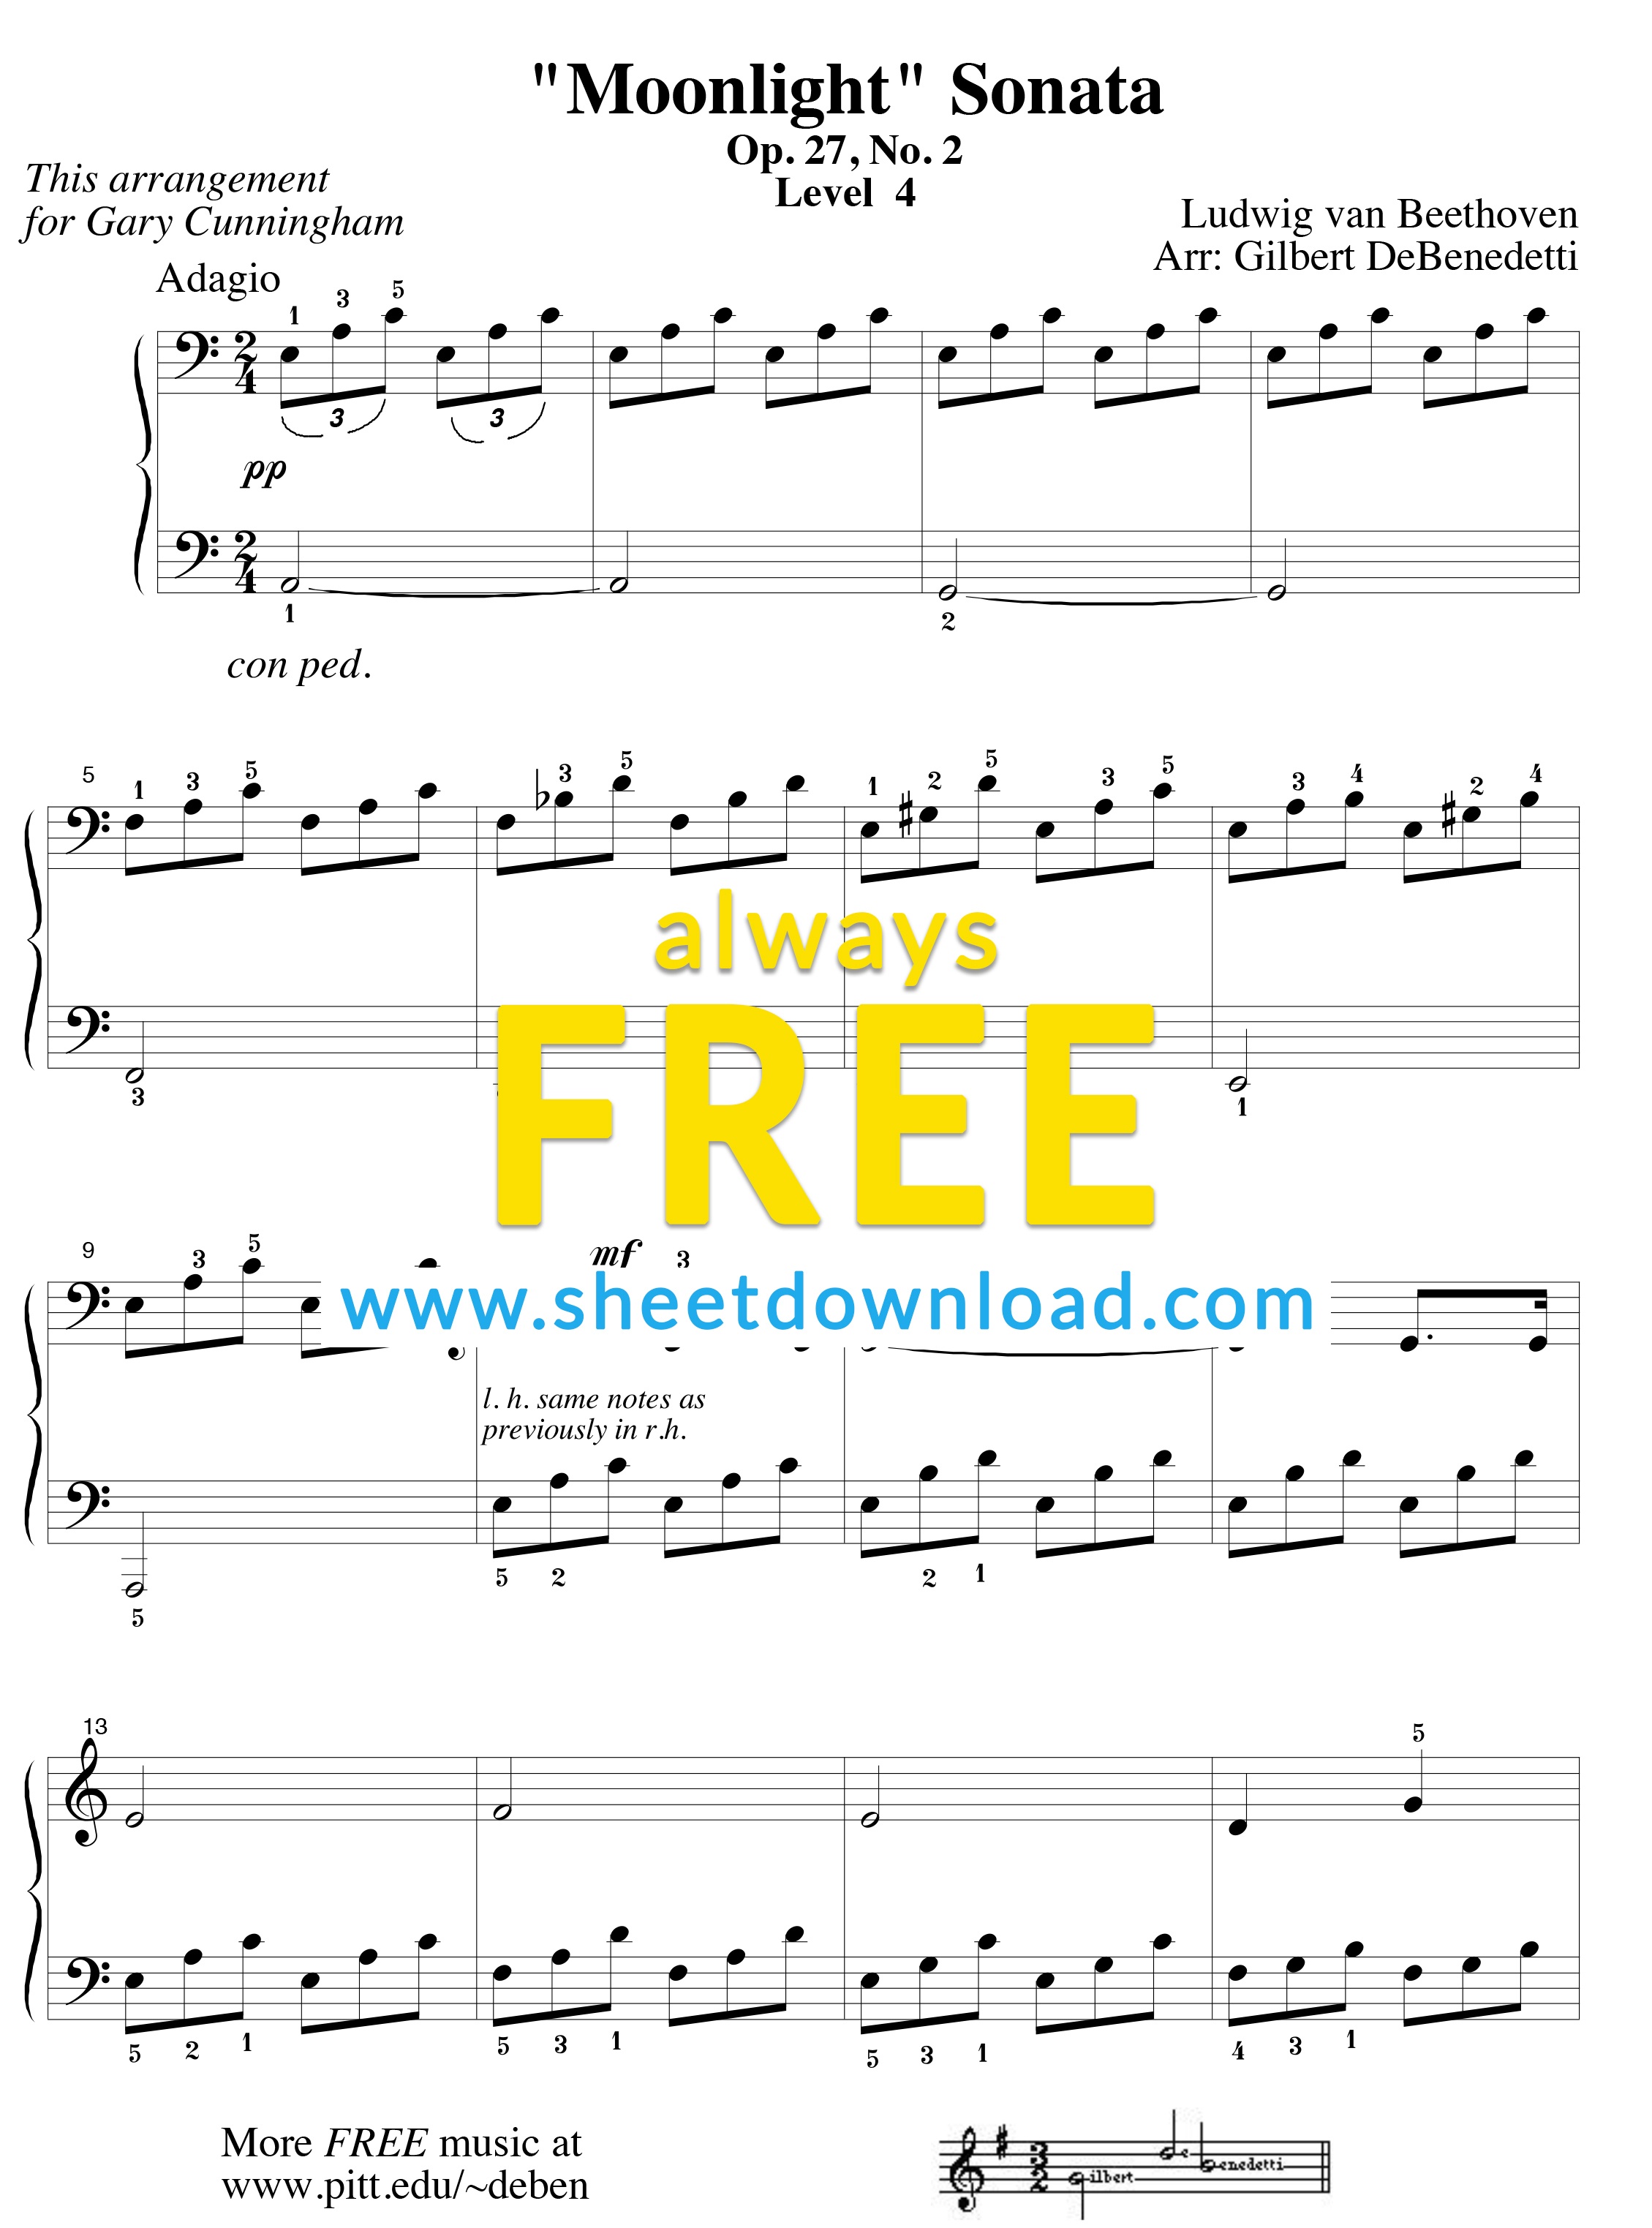 Free Piano Sheet Music To Download And Print - High Quality Pdfs - Sheet Music Online Free Printable